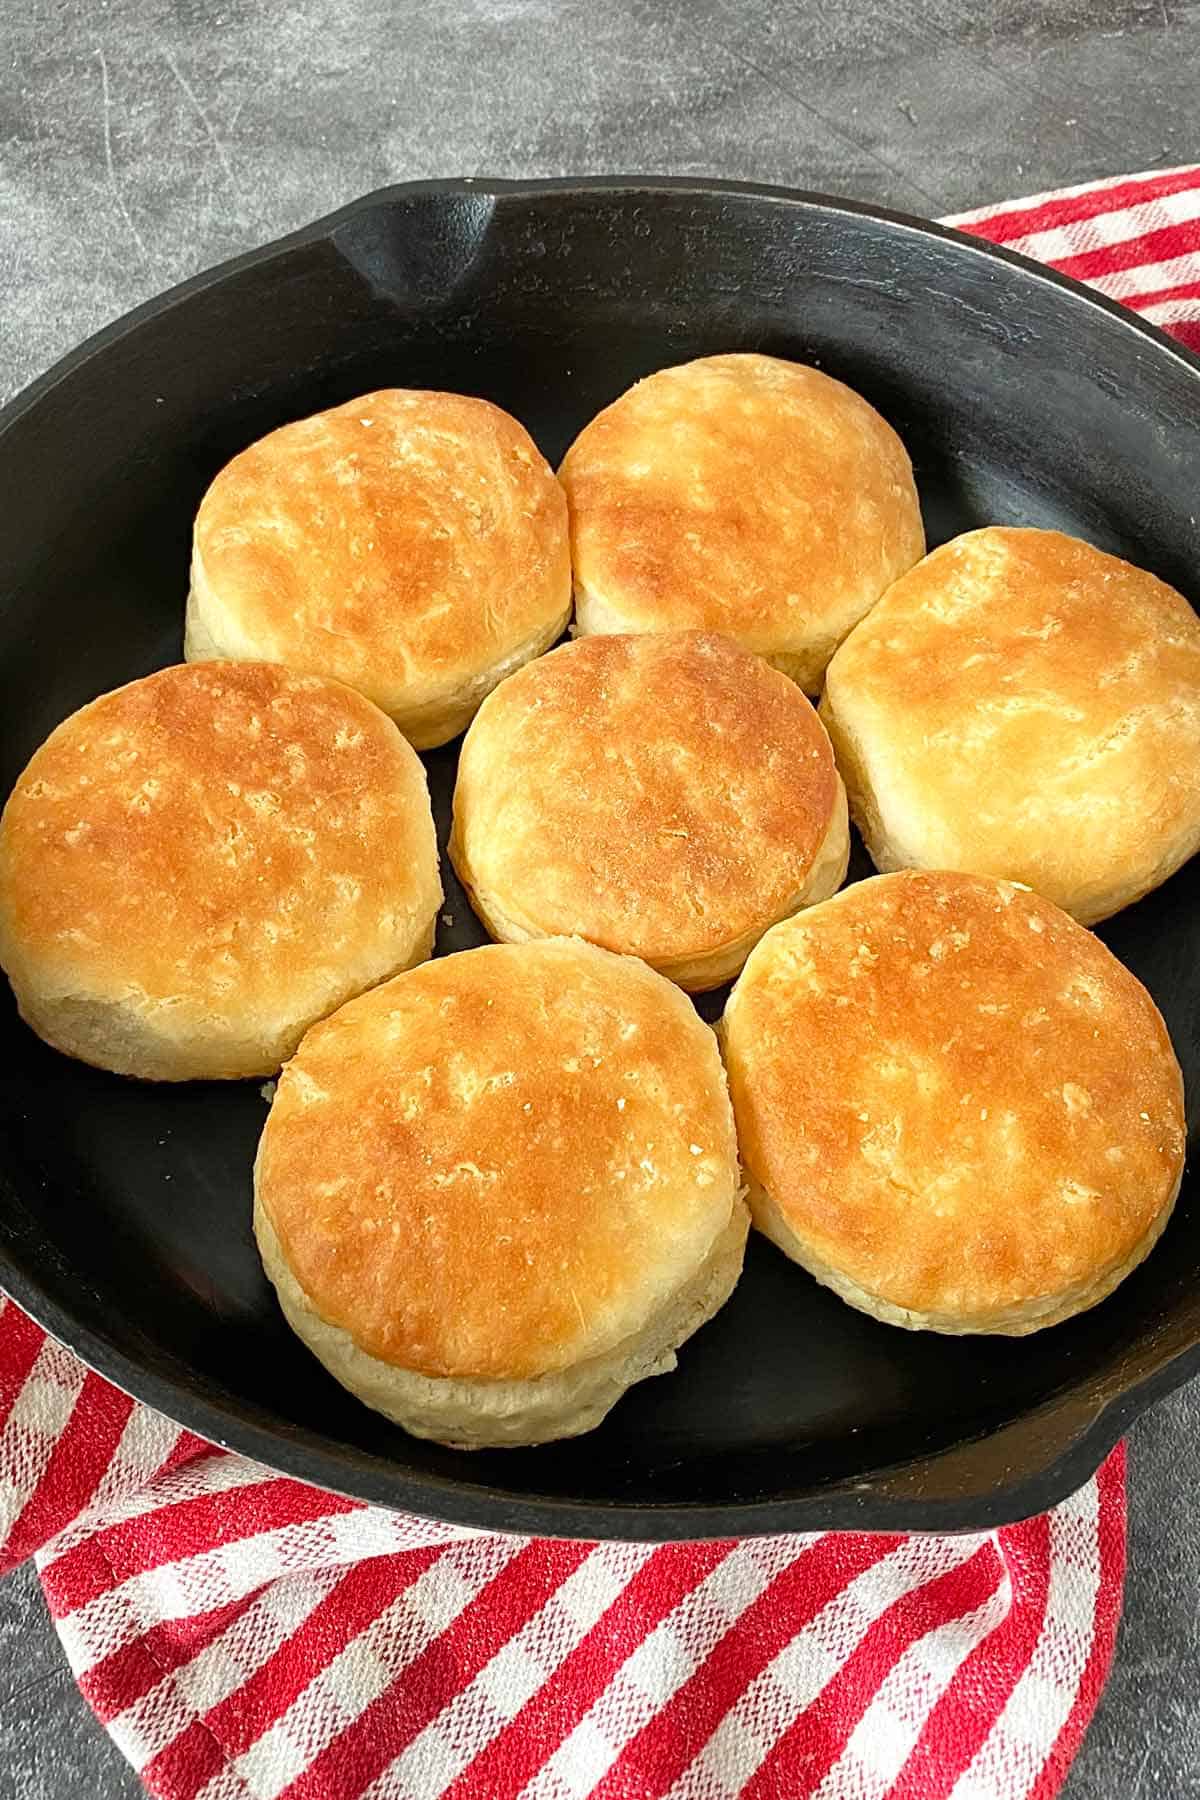 A skillet filled with home baked biscuits made with bacon grease and butter.